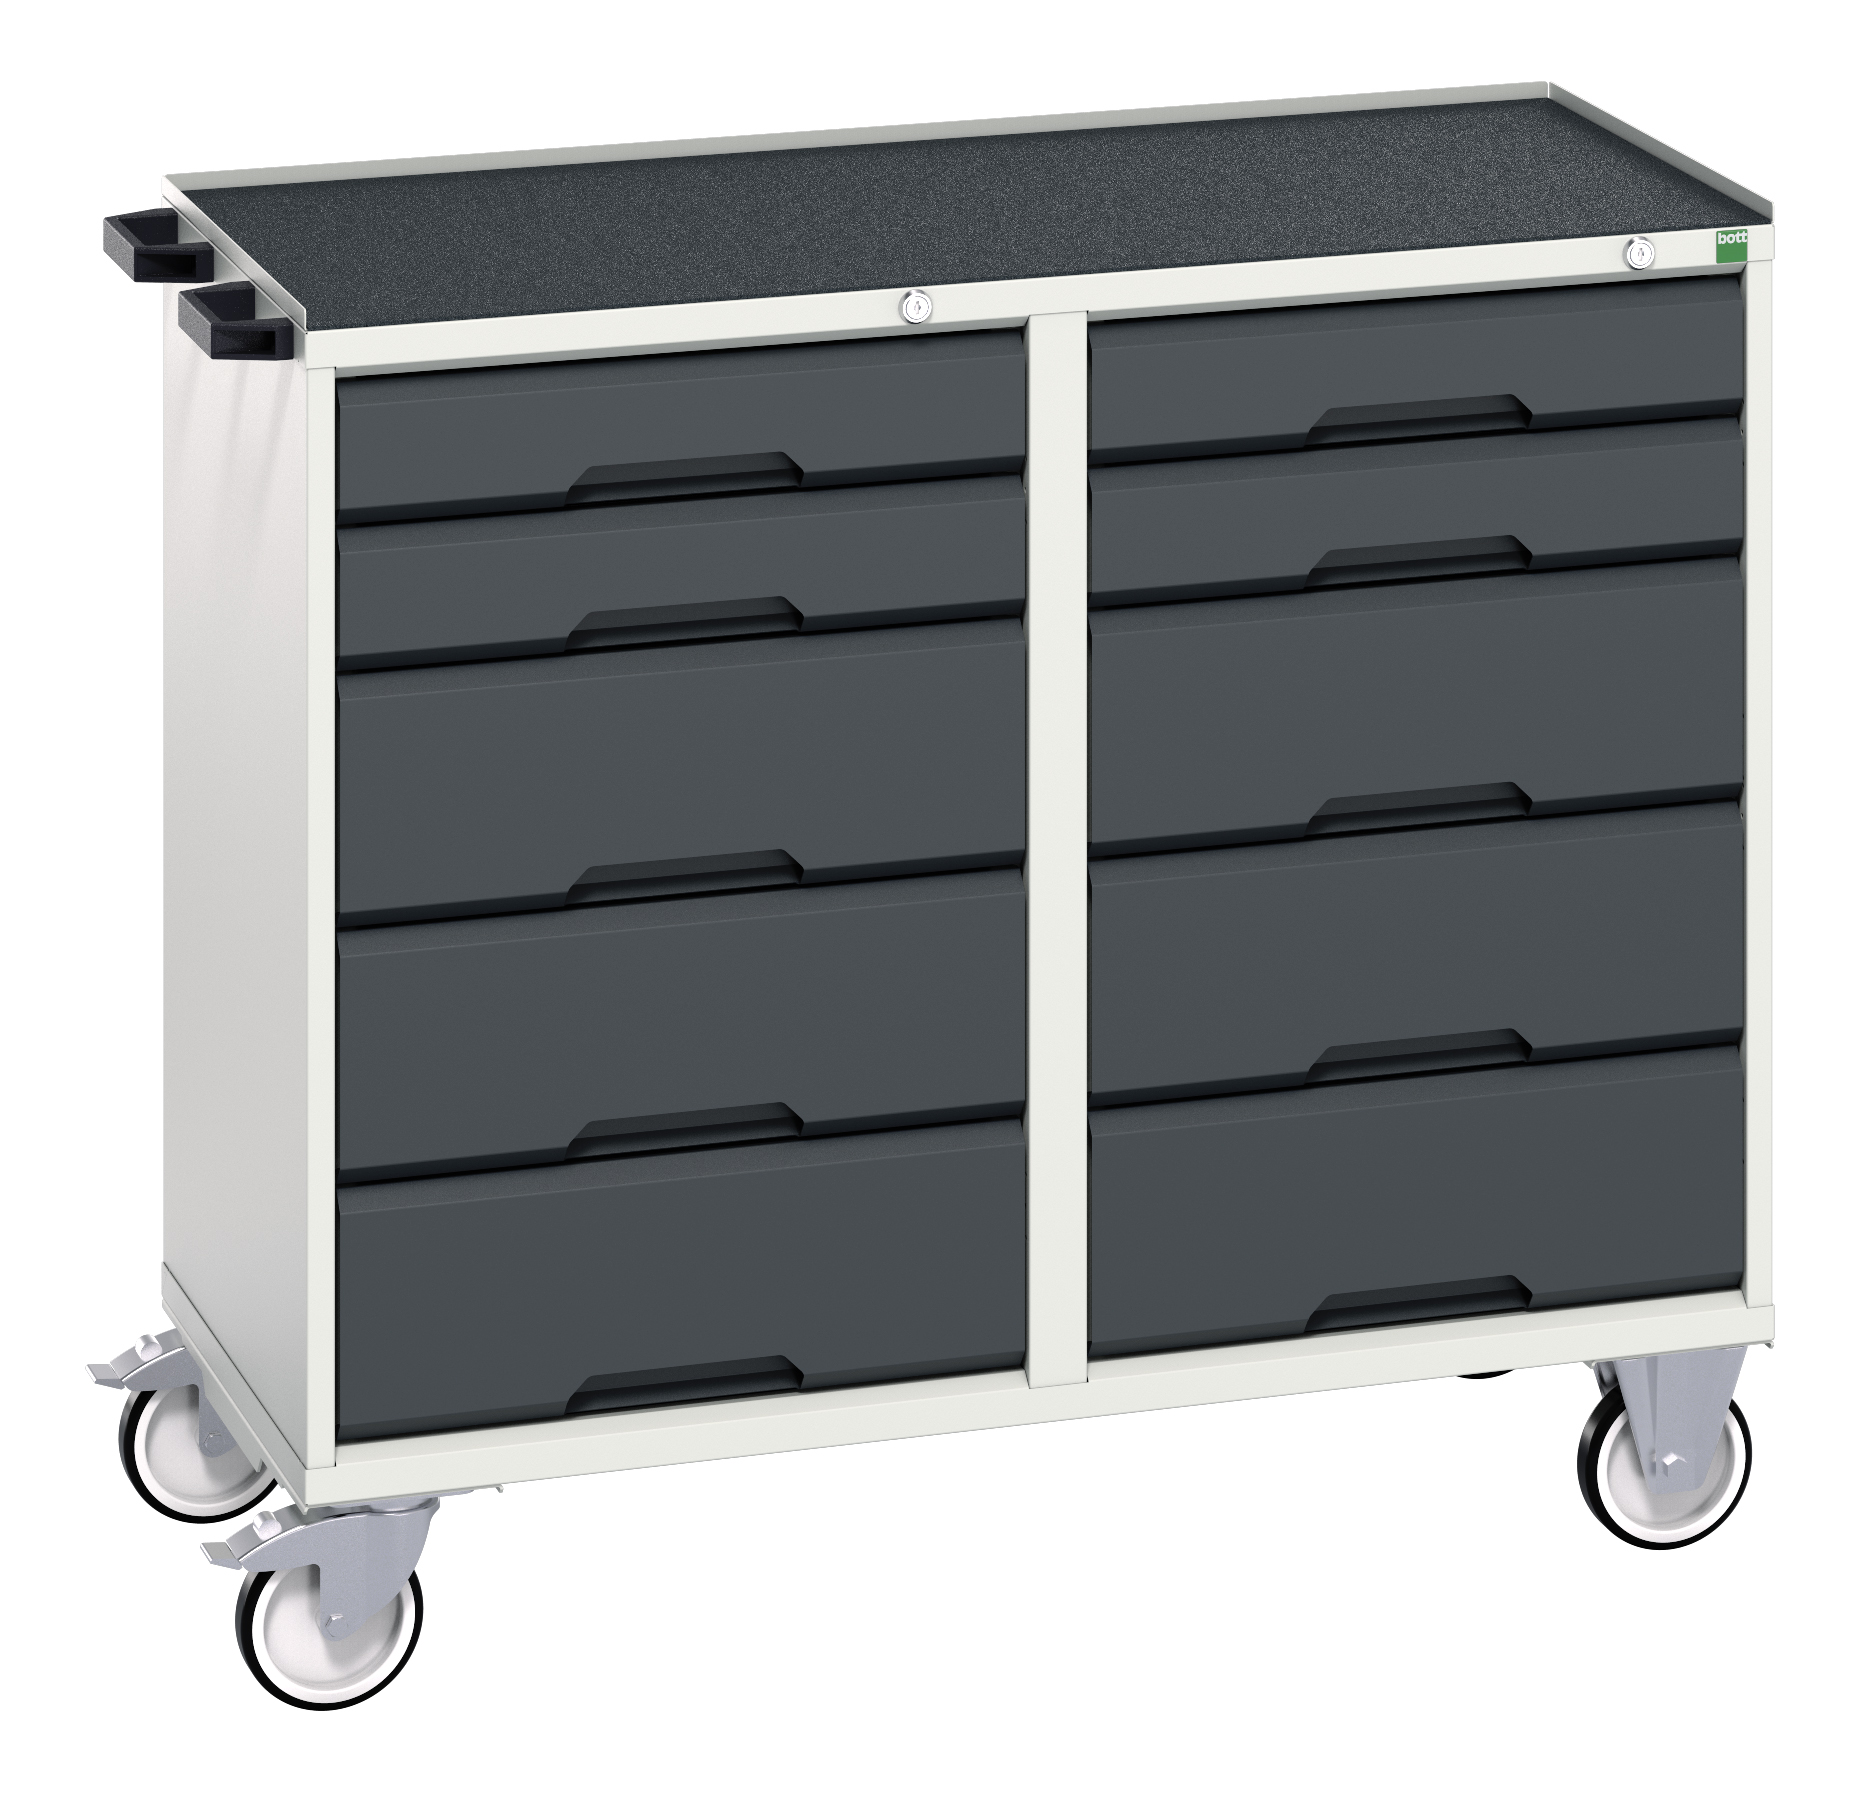 Bott Verso Maintenance Trolley With 10 Drawers & Top Tray With Mat - 16927102.19